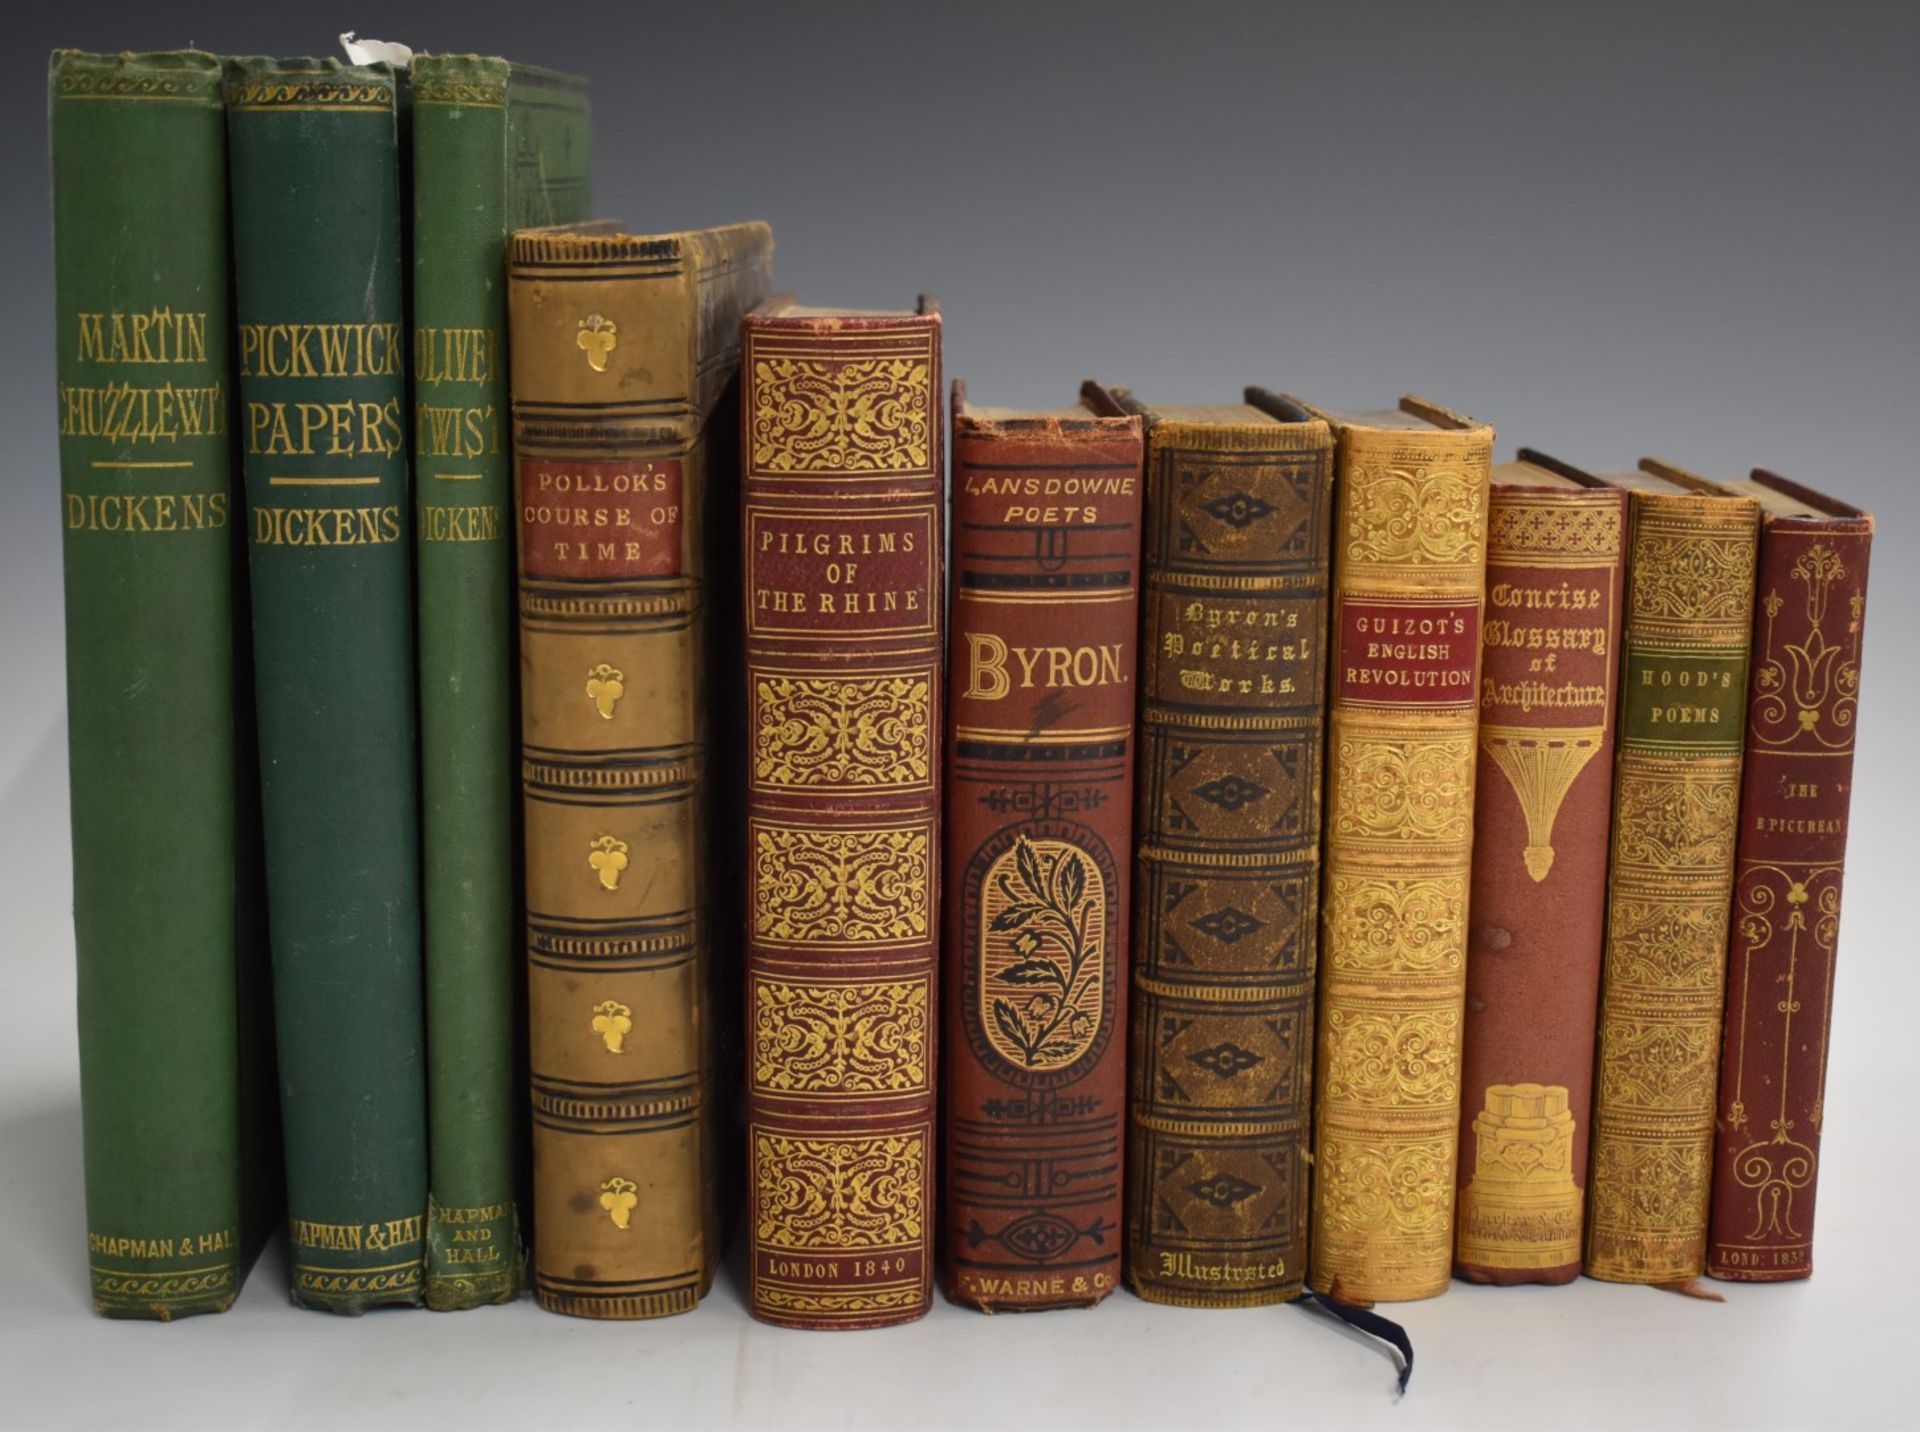 [Bindings] Charles Dickens Oliver Twist, Martin Chuzzlewit and Pickwick Papers (c.1880s)